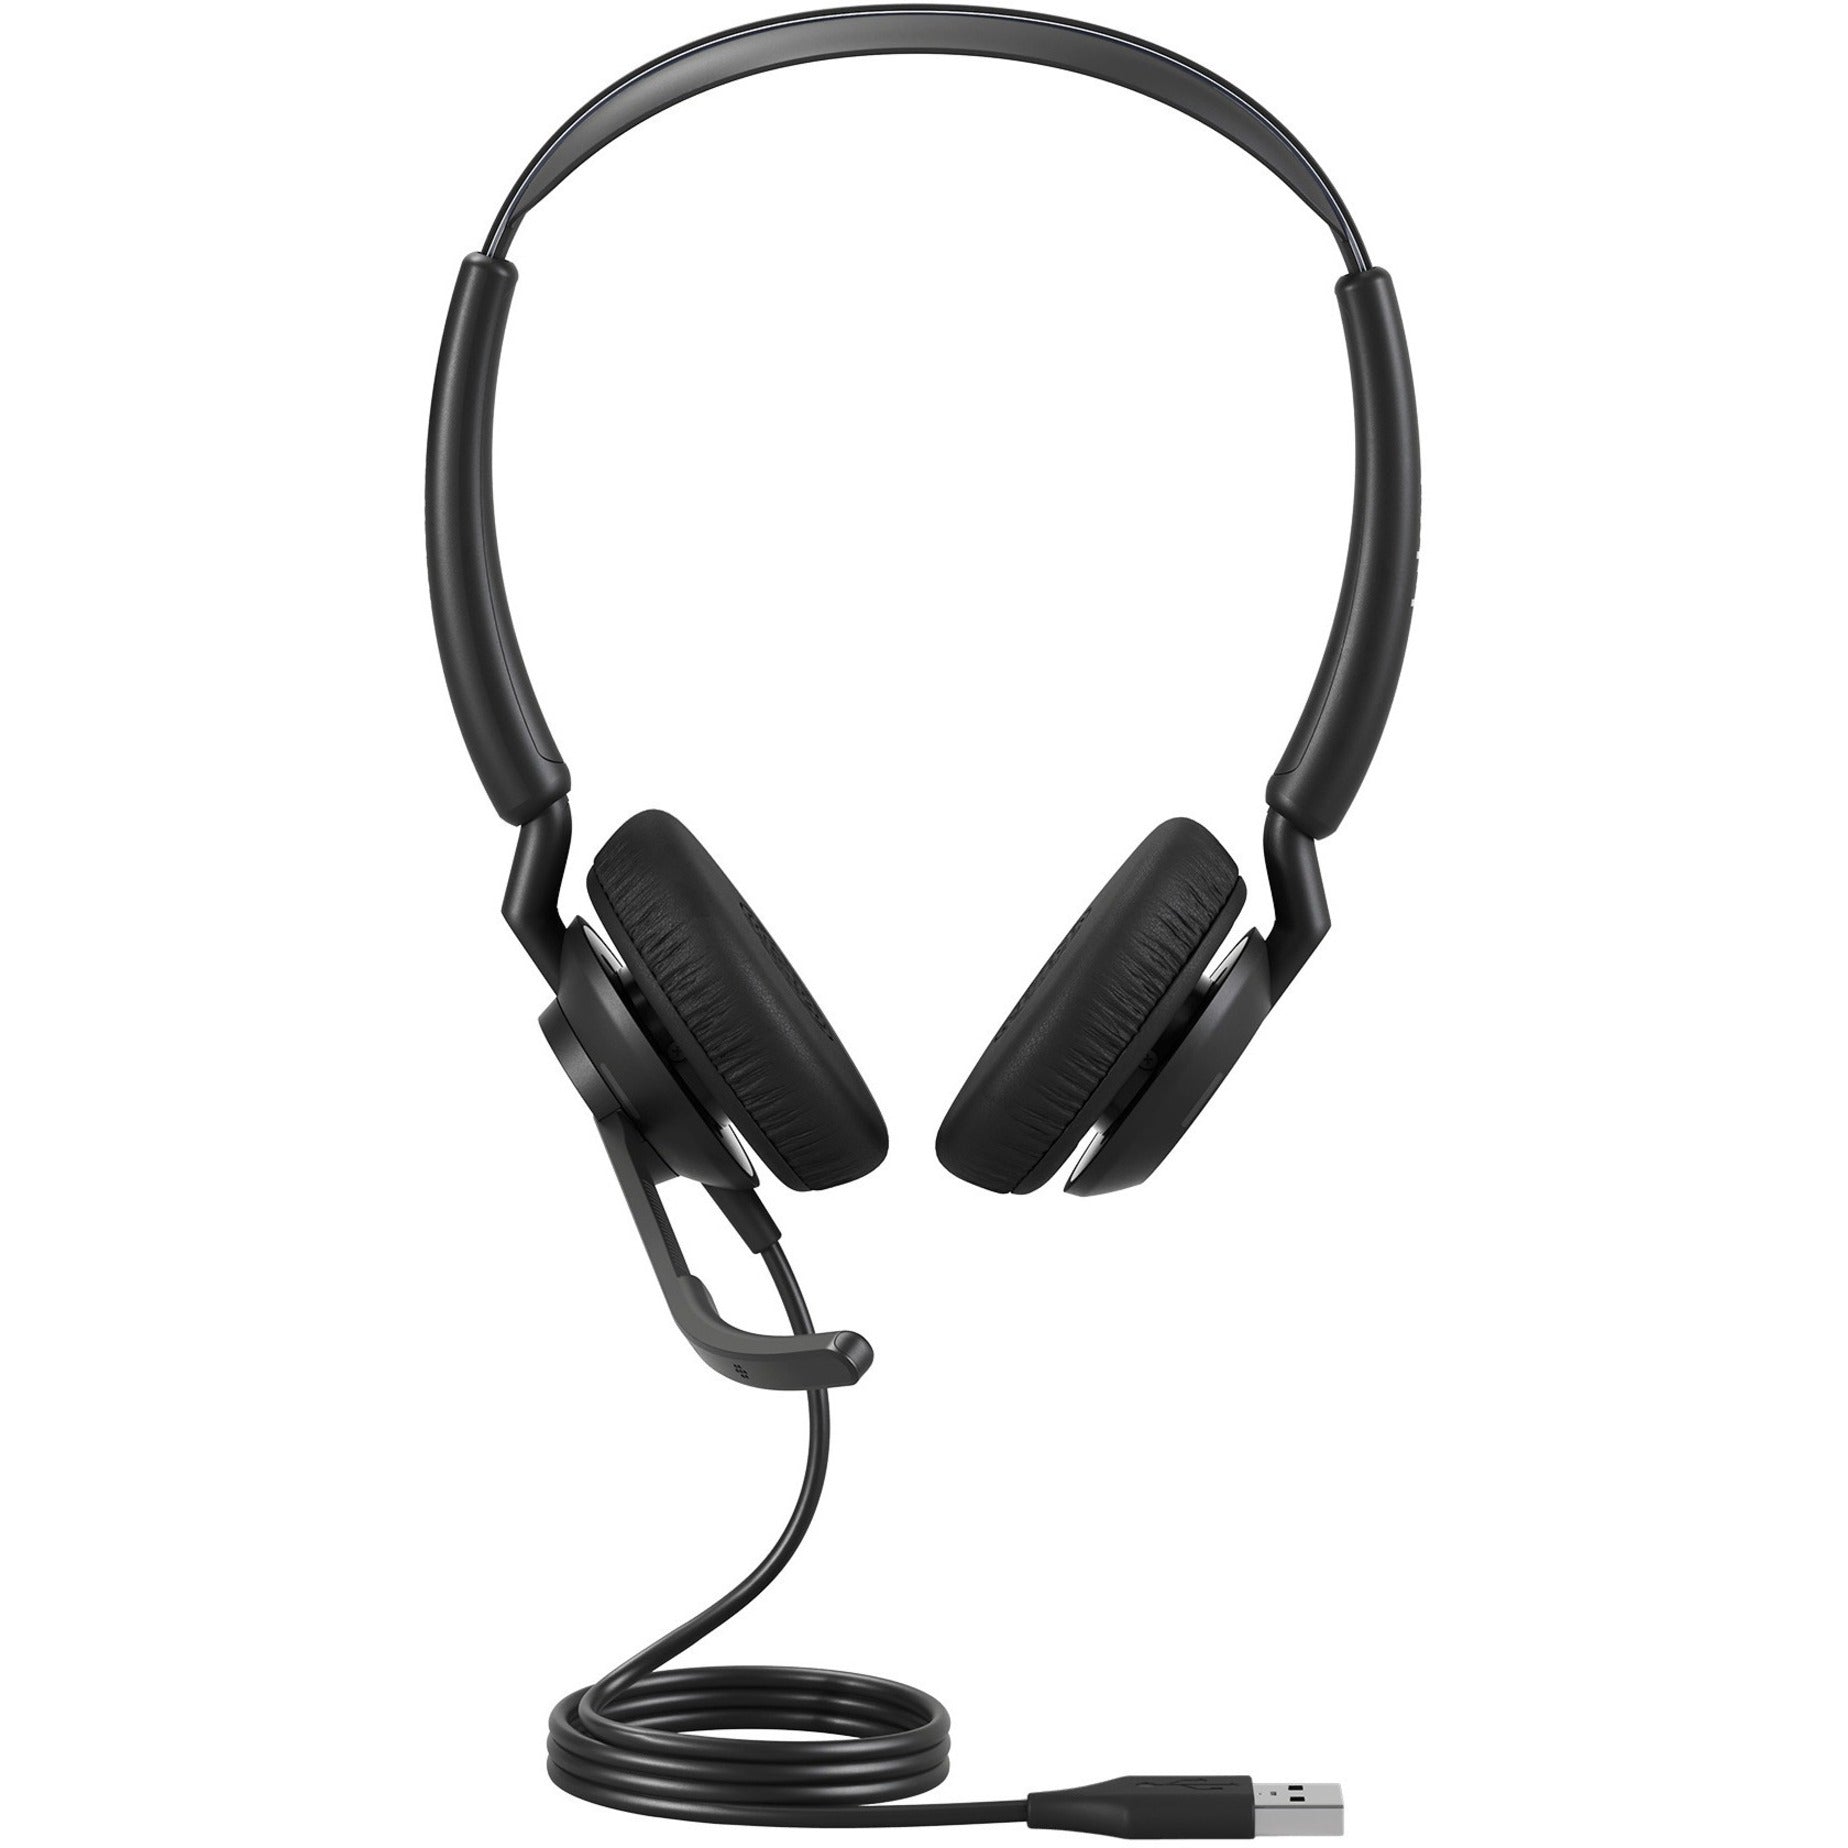 Jabra 5099-610-279 Engage 50 II Headset, Durable, Hearing Protection, Busylight, SafeTone 2.0 Technology, PeakStop, Comfortable